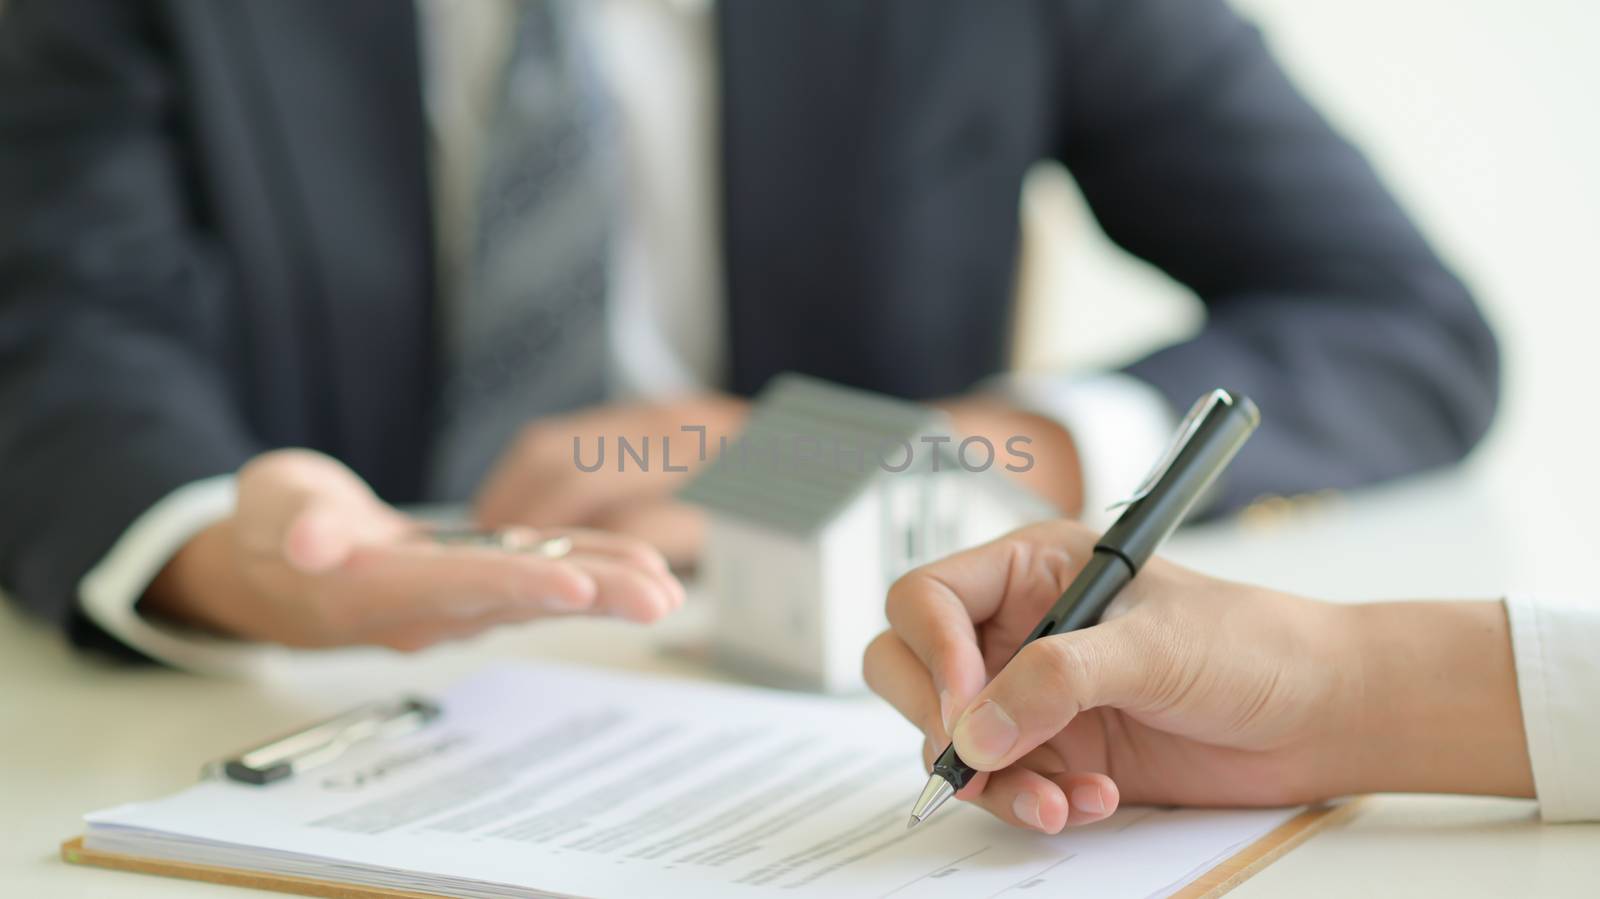 Customer signs a home loan contract with a bank official. by poungsaed